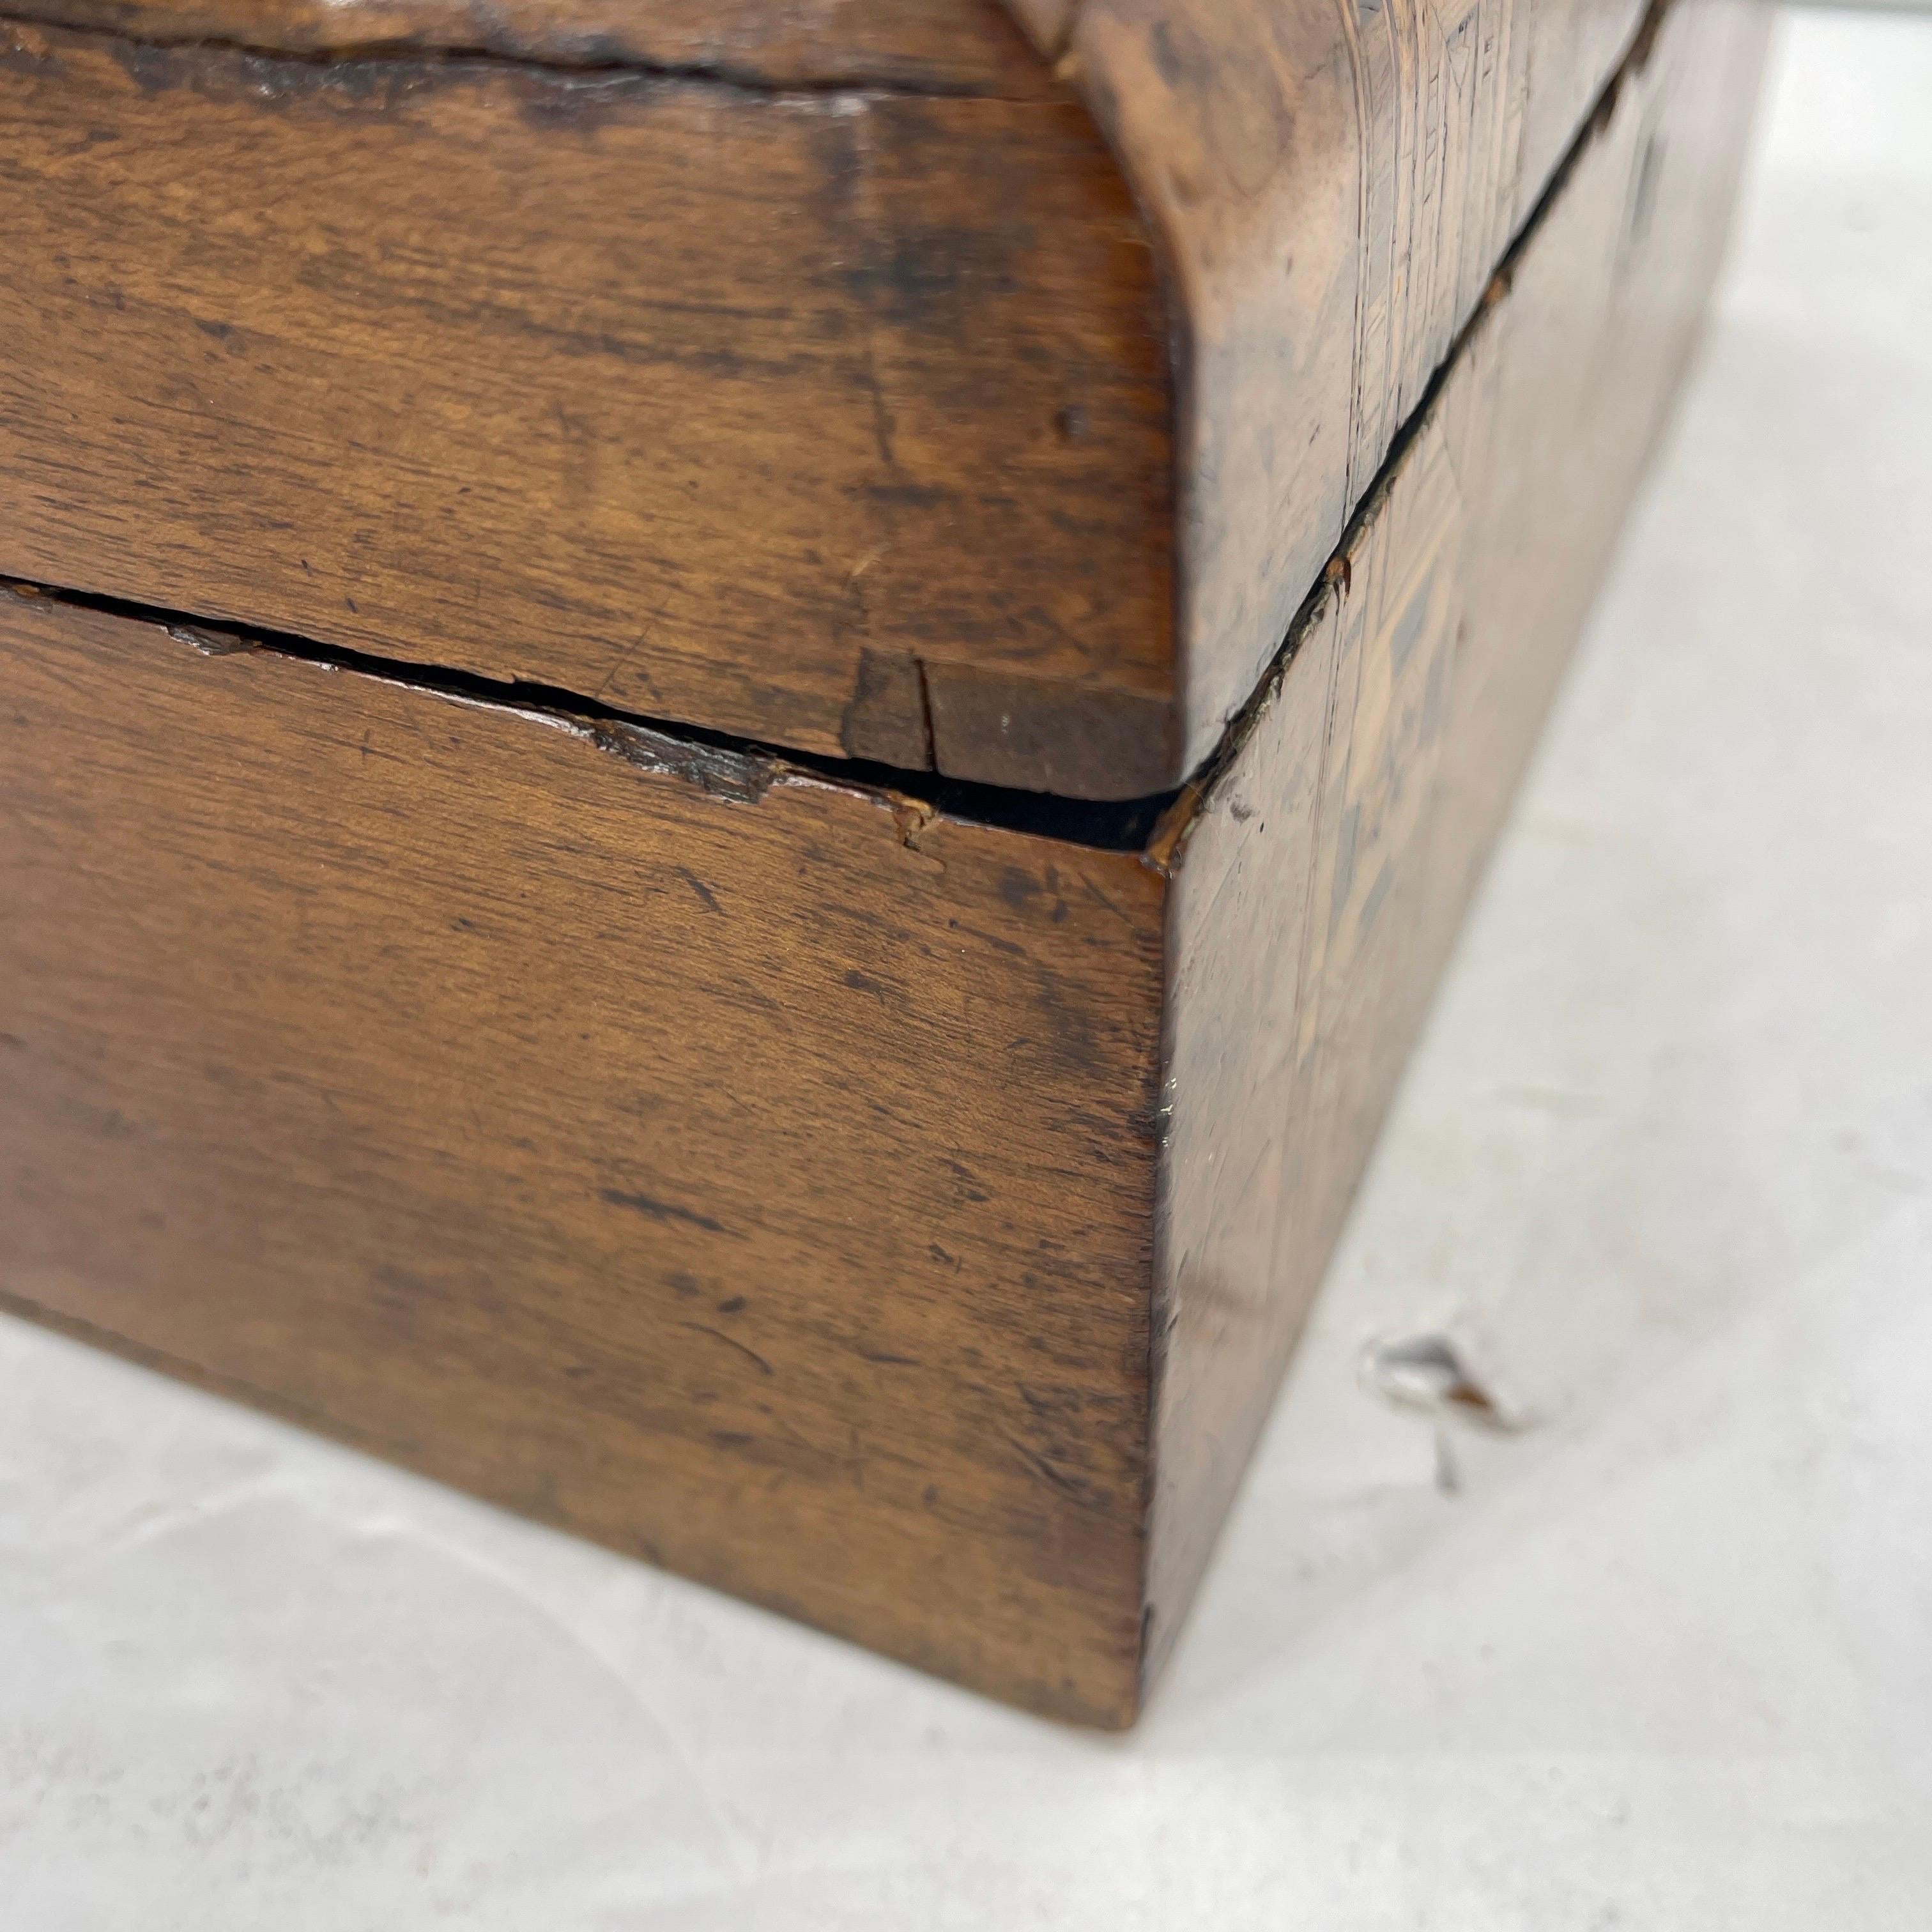 Swedish Inlaid Fruitwood and Veneered Box with Curved Top Early 19th Century For Sale 6